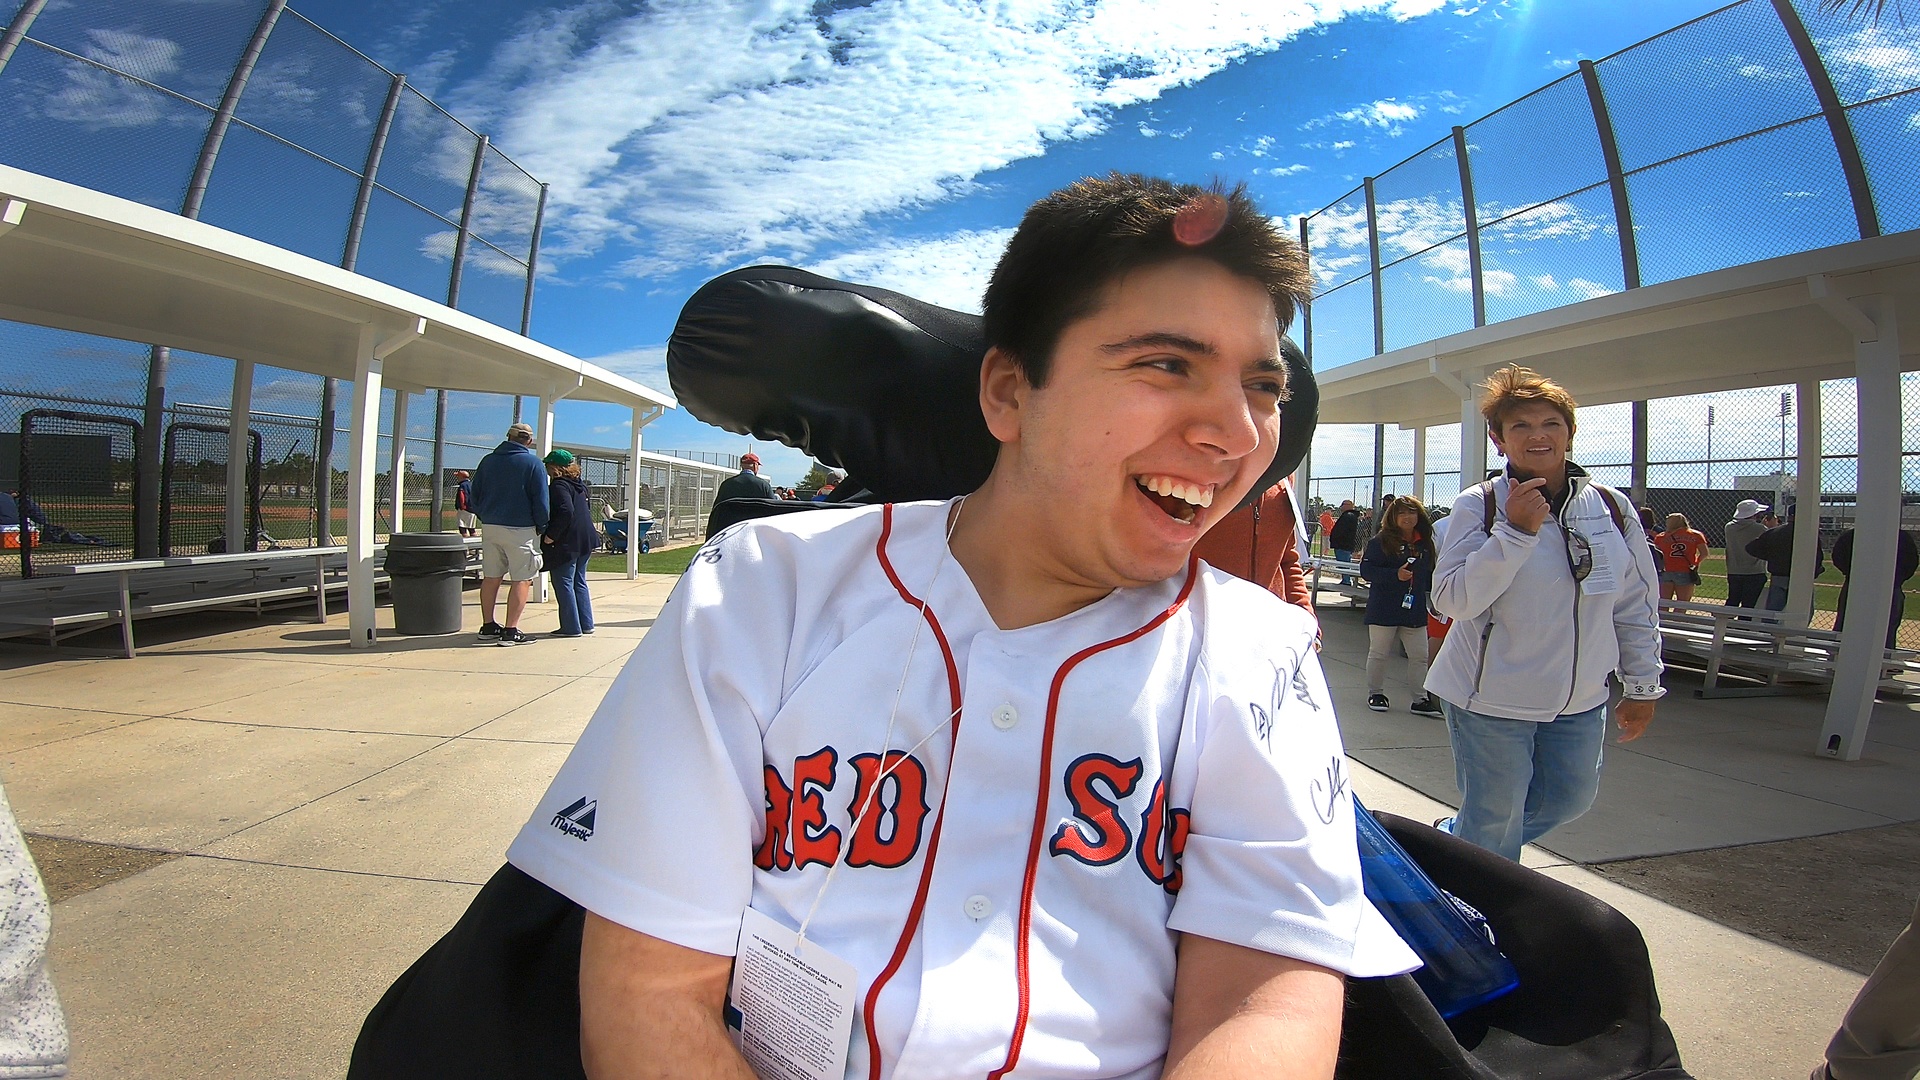 The image shows a man wearing a white Red Sox baseball jersey who appears to be in a motorized wheelchair. He has short brown hair and is smiling and is possibly engaged in an outdoor athletic game, most likely baseball.